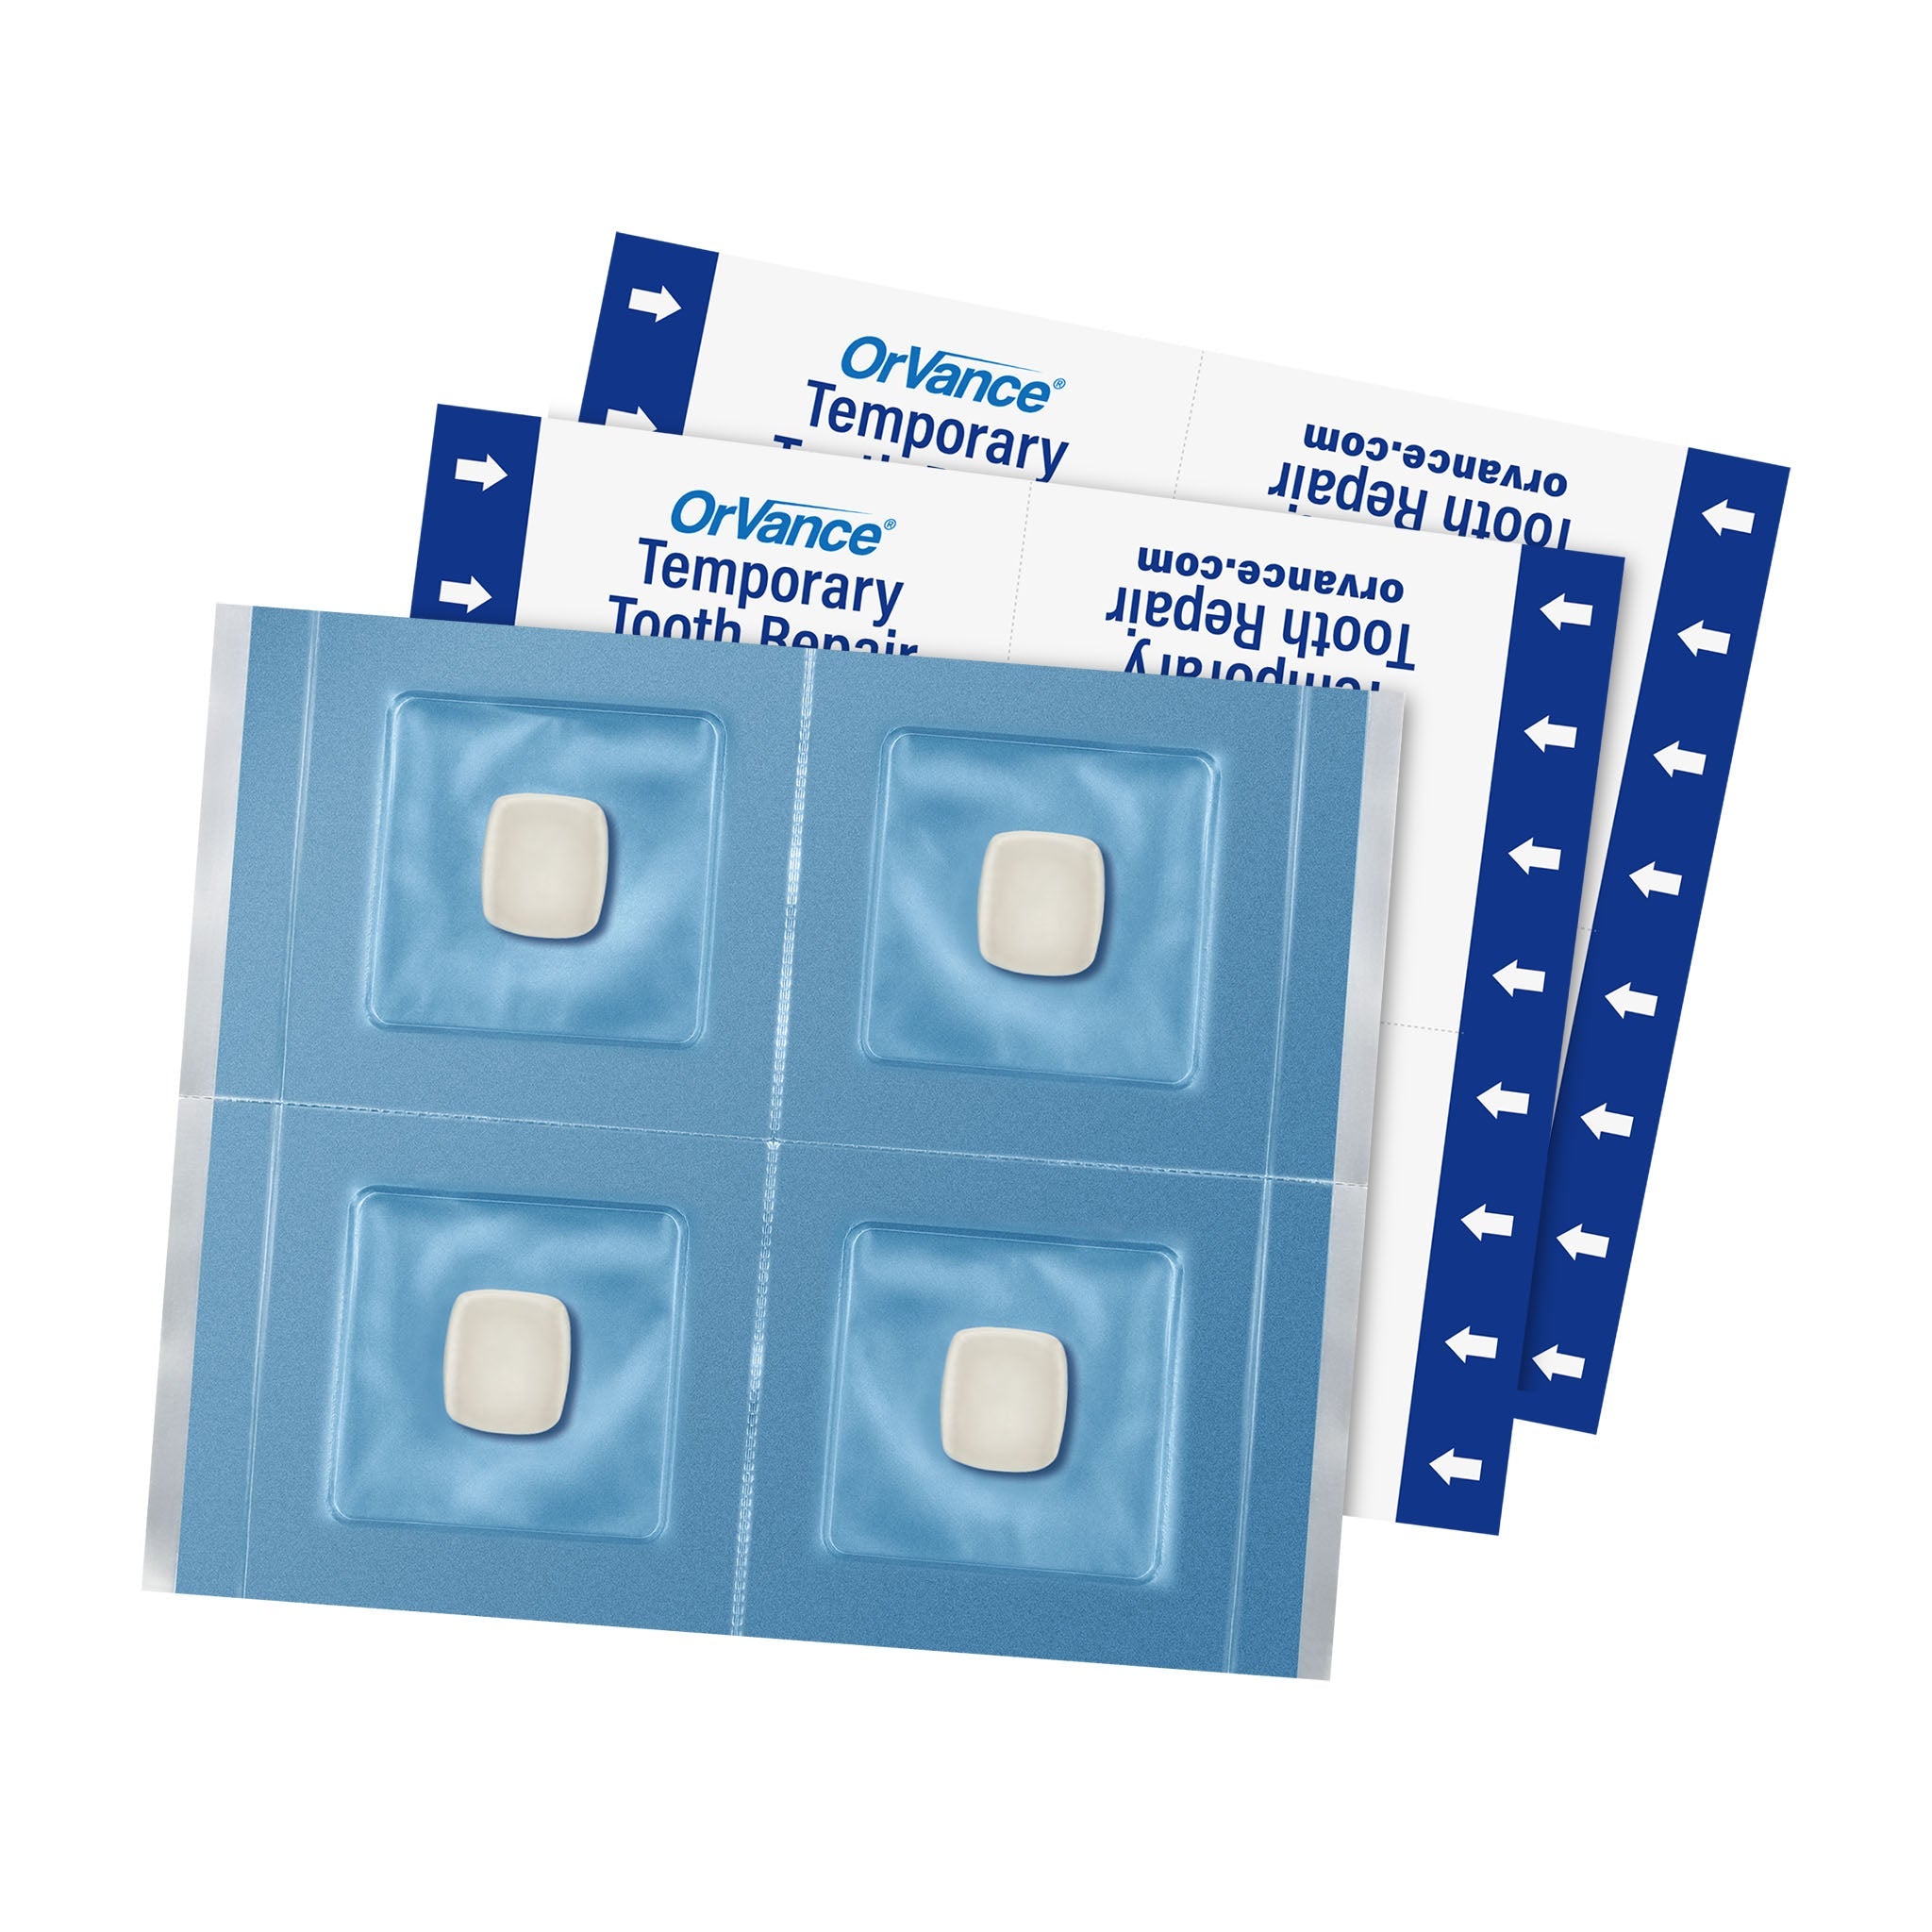 OrVance® Temporary Tooth Repair Fanned Foil Packs